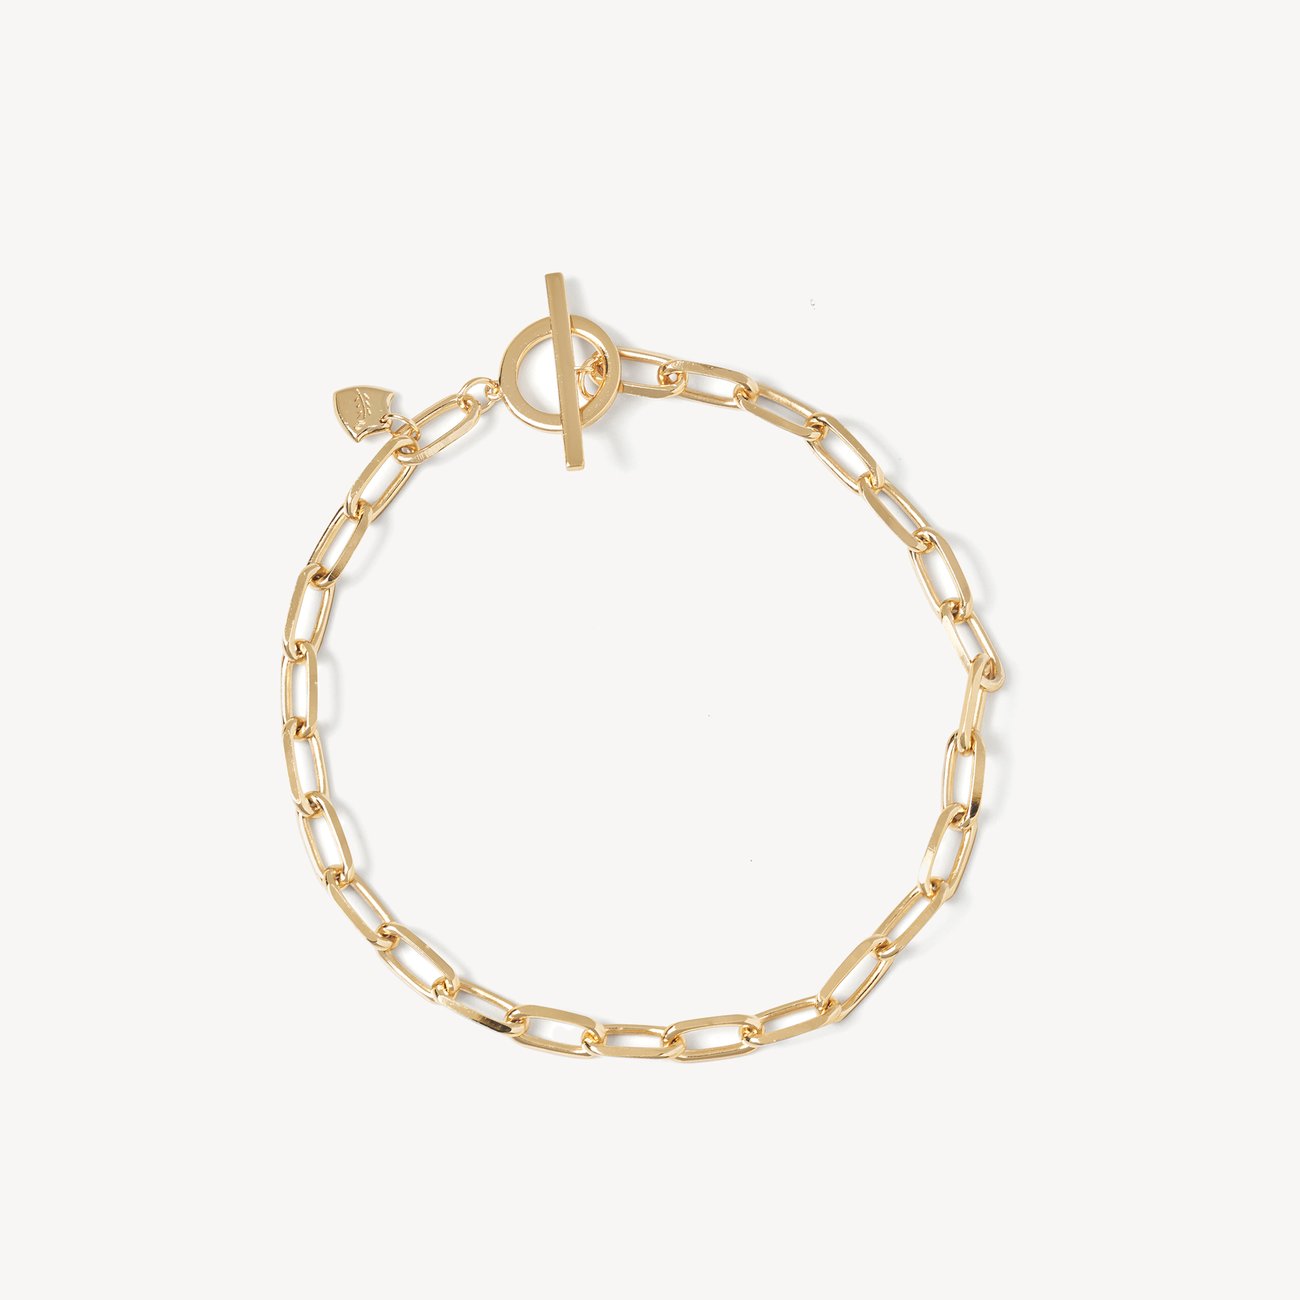 Aspinal of London + Chain Bracelet in 18ct Gold on Sterling Silver